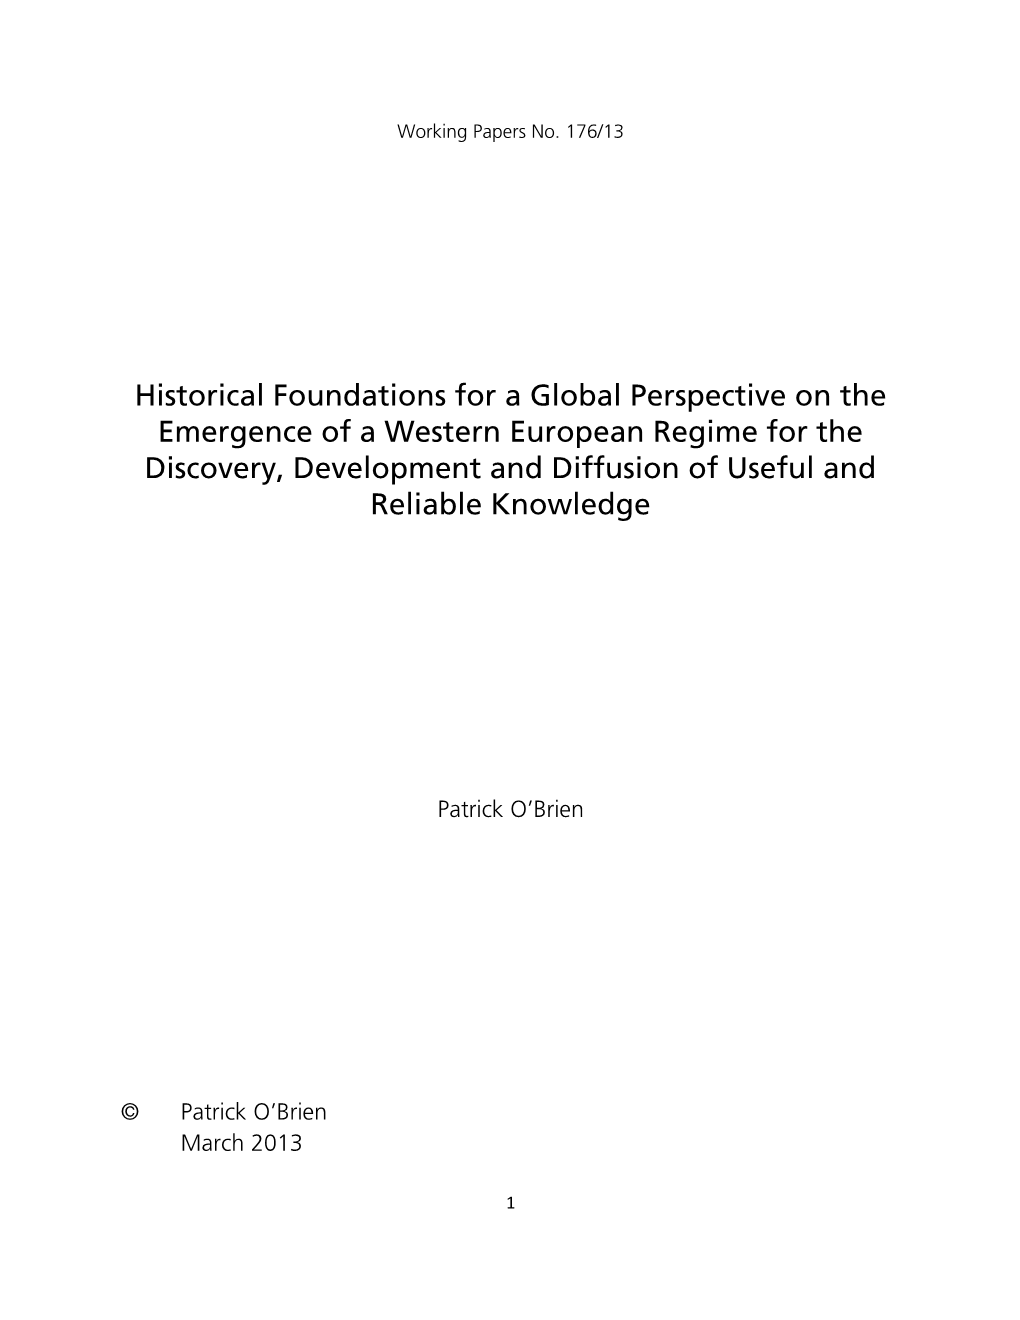 Stages in the Evolution of Regimes for the Generation, Development and Diffusion of Useful and Reliable Knowledge in the West